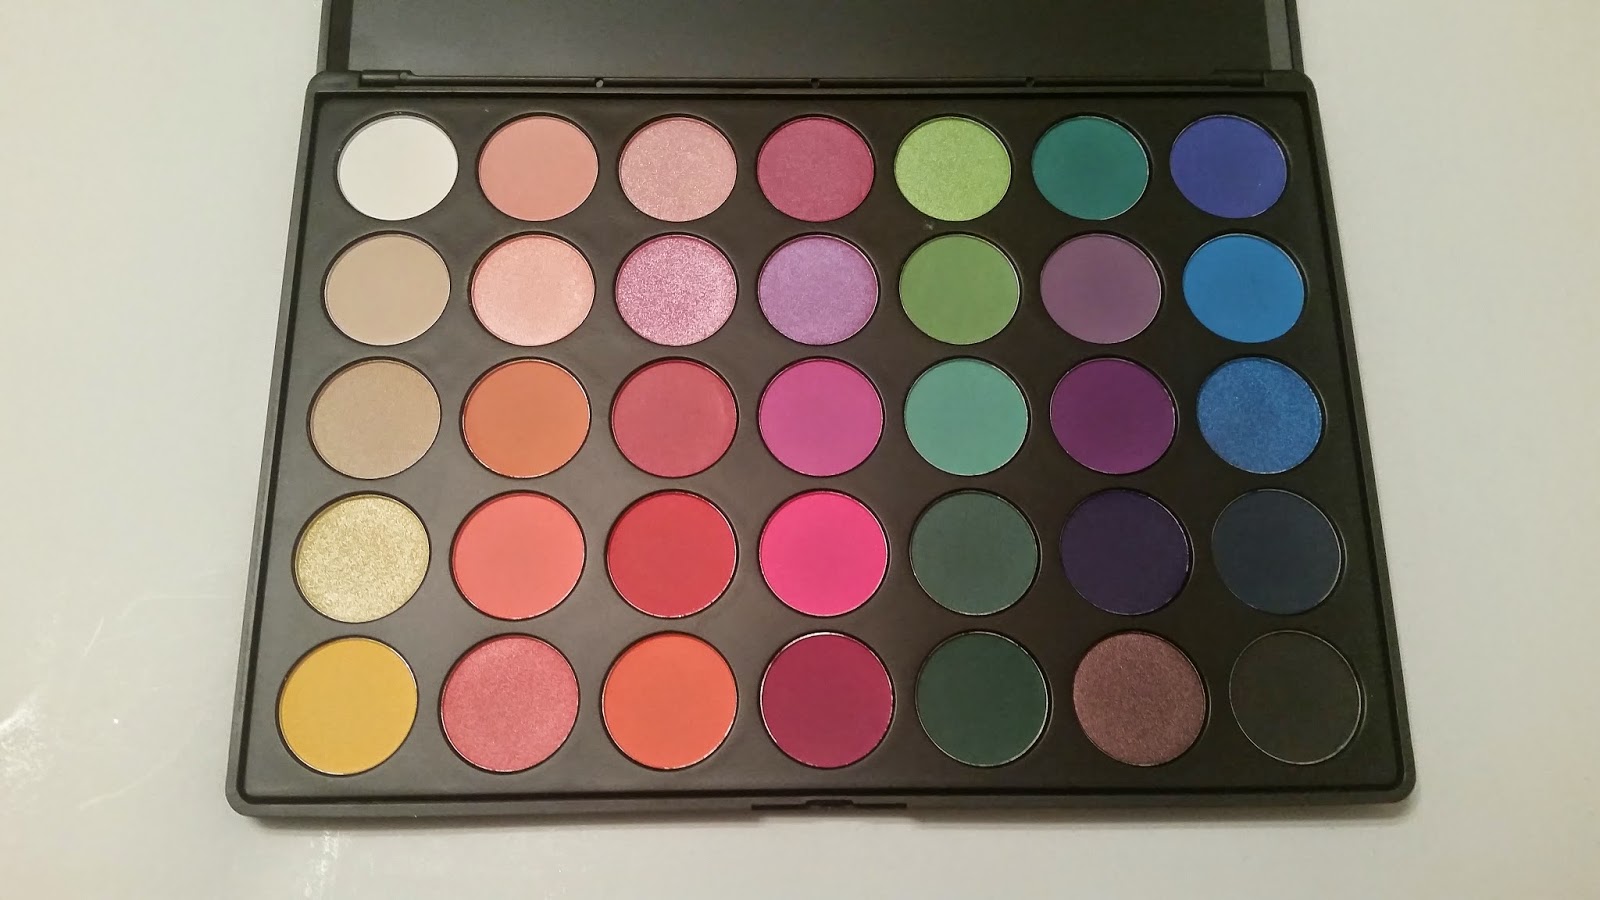 Beauty Brief Morphe 35B Palette Review and Swatches